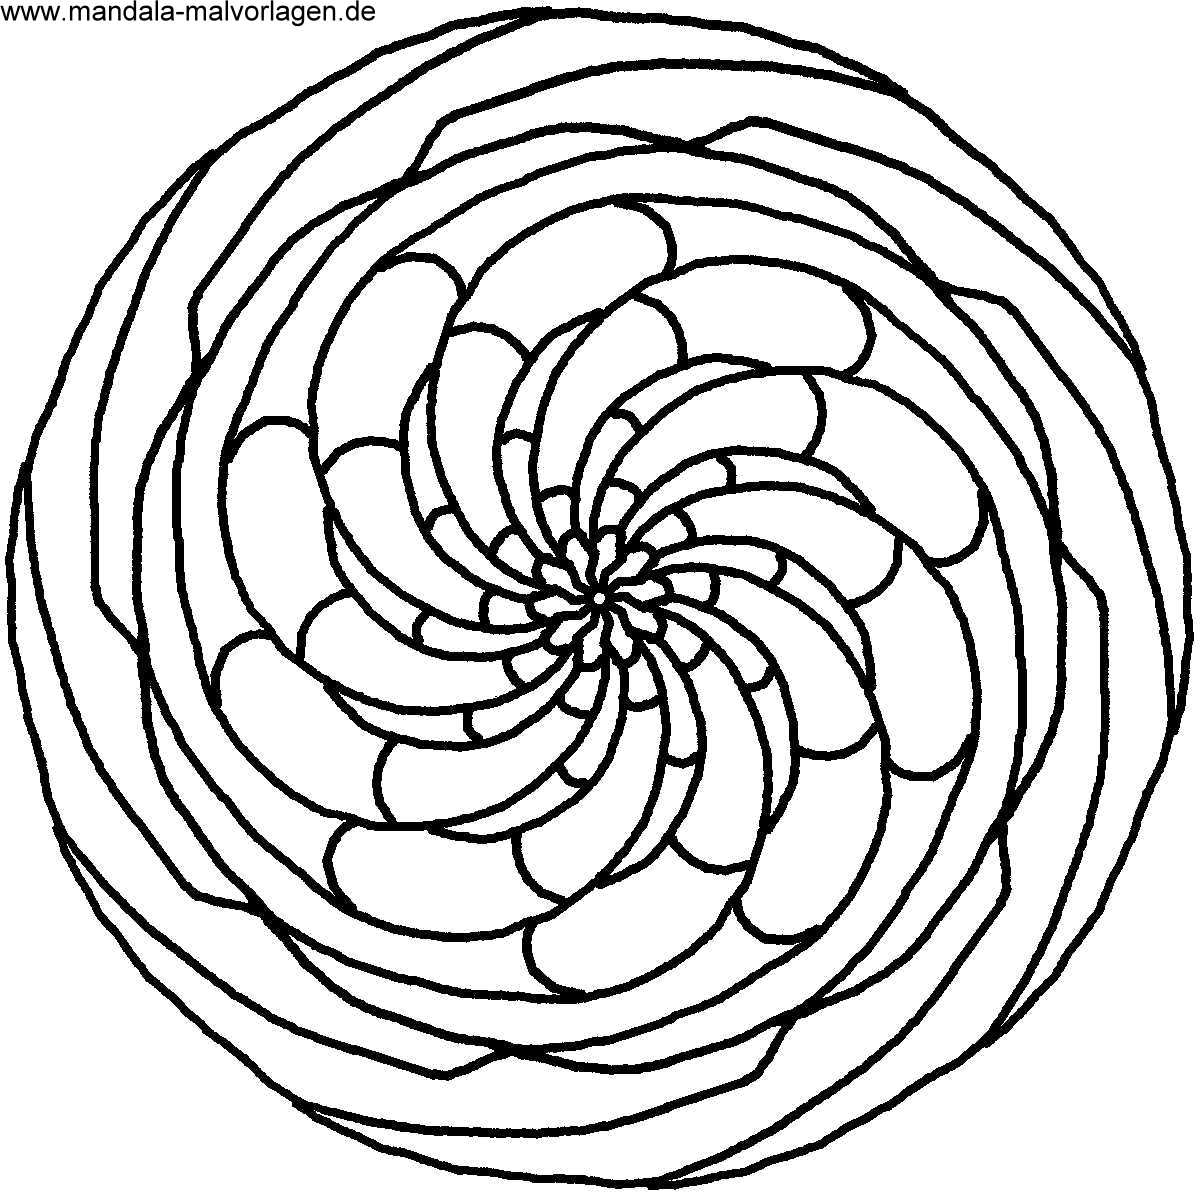 Spiral Coloring Pages at GetDrawings | Free download